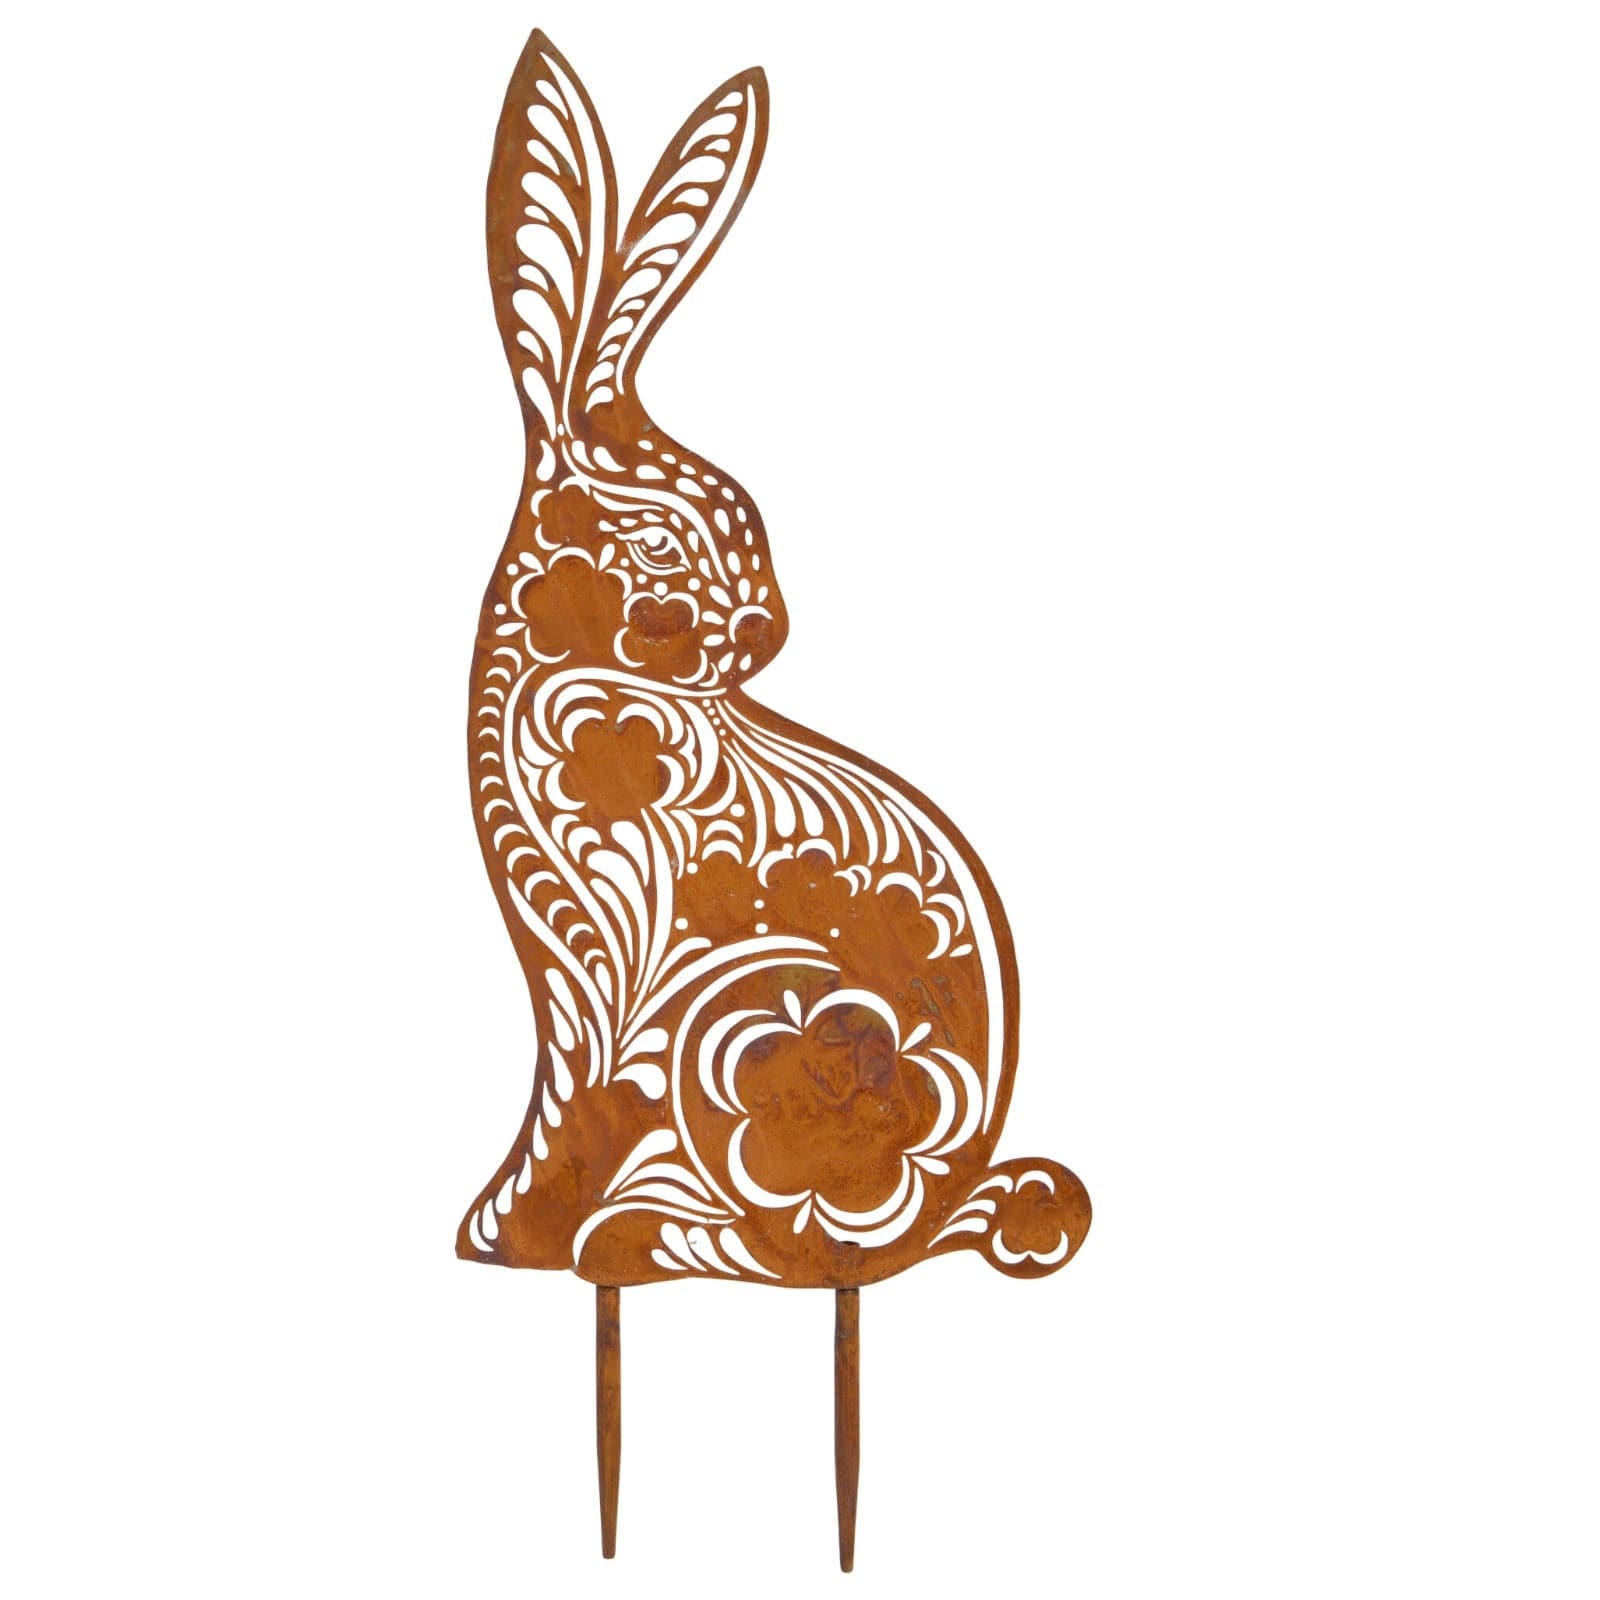 Rustic Rusty Hare Garden Silhouette - The Farthing